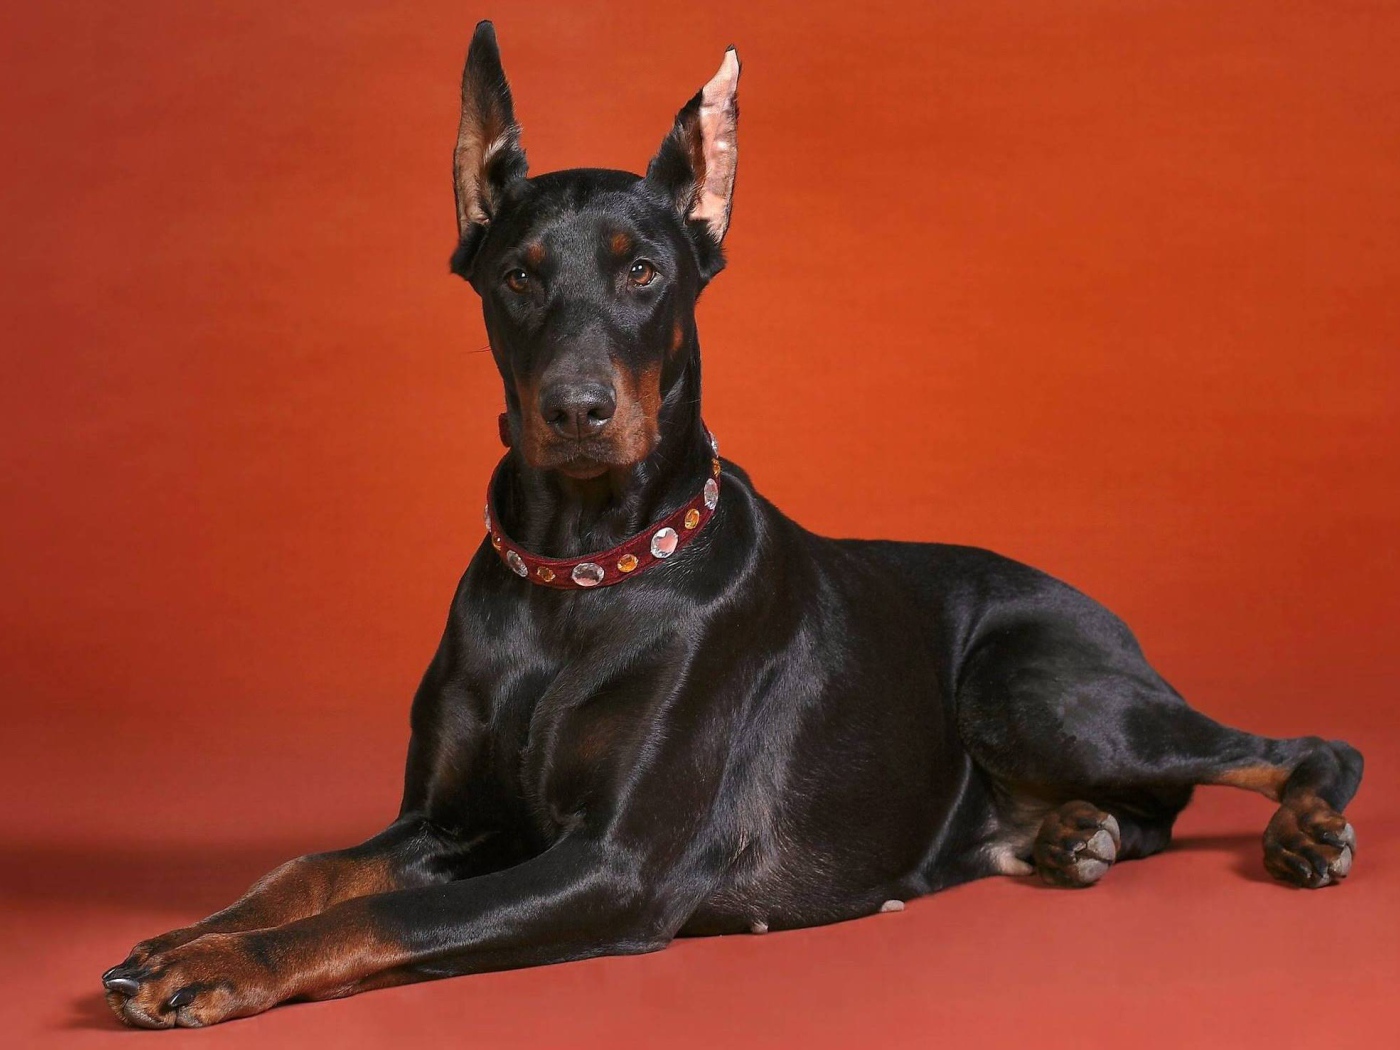 Cute doberman on the red background